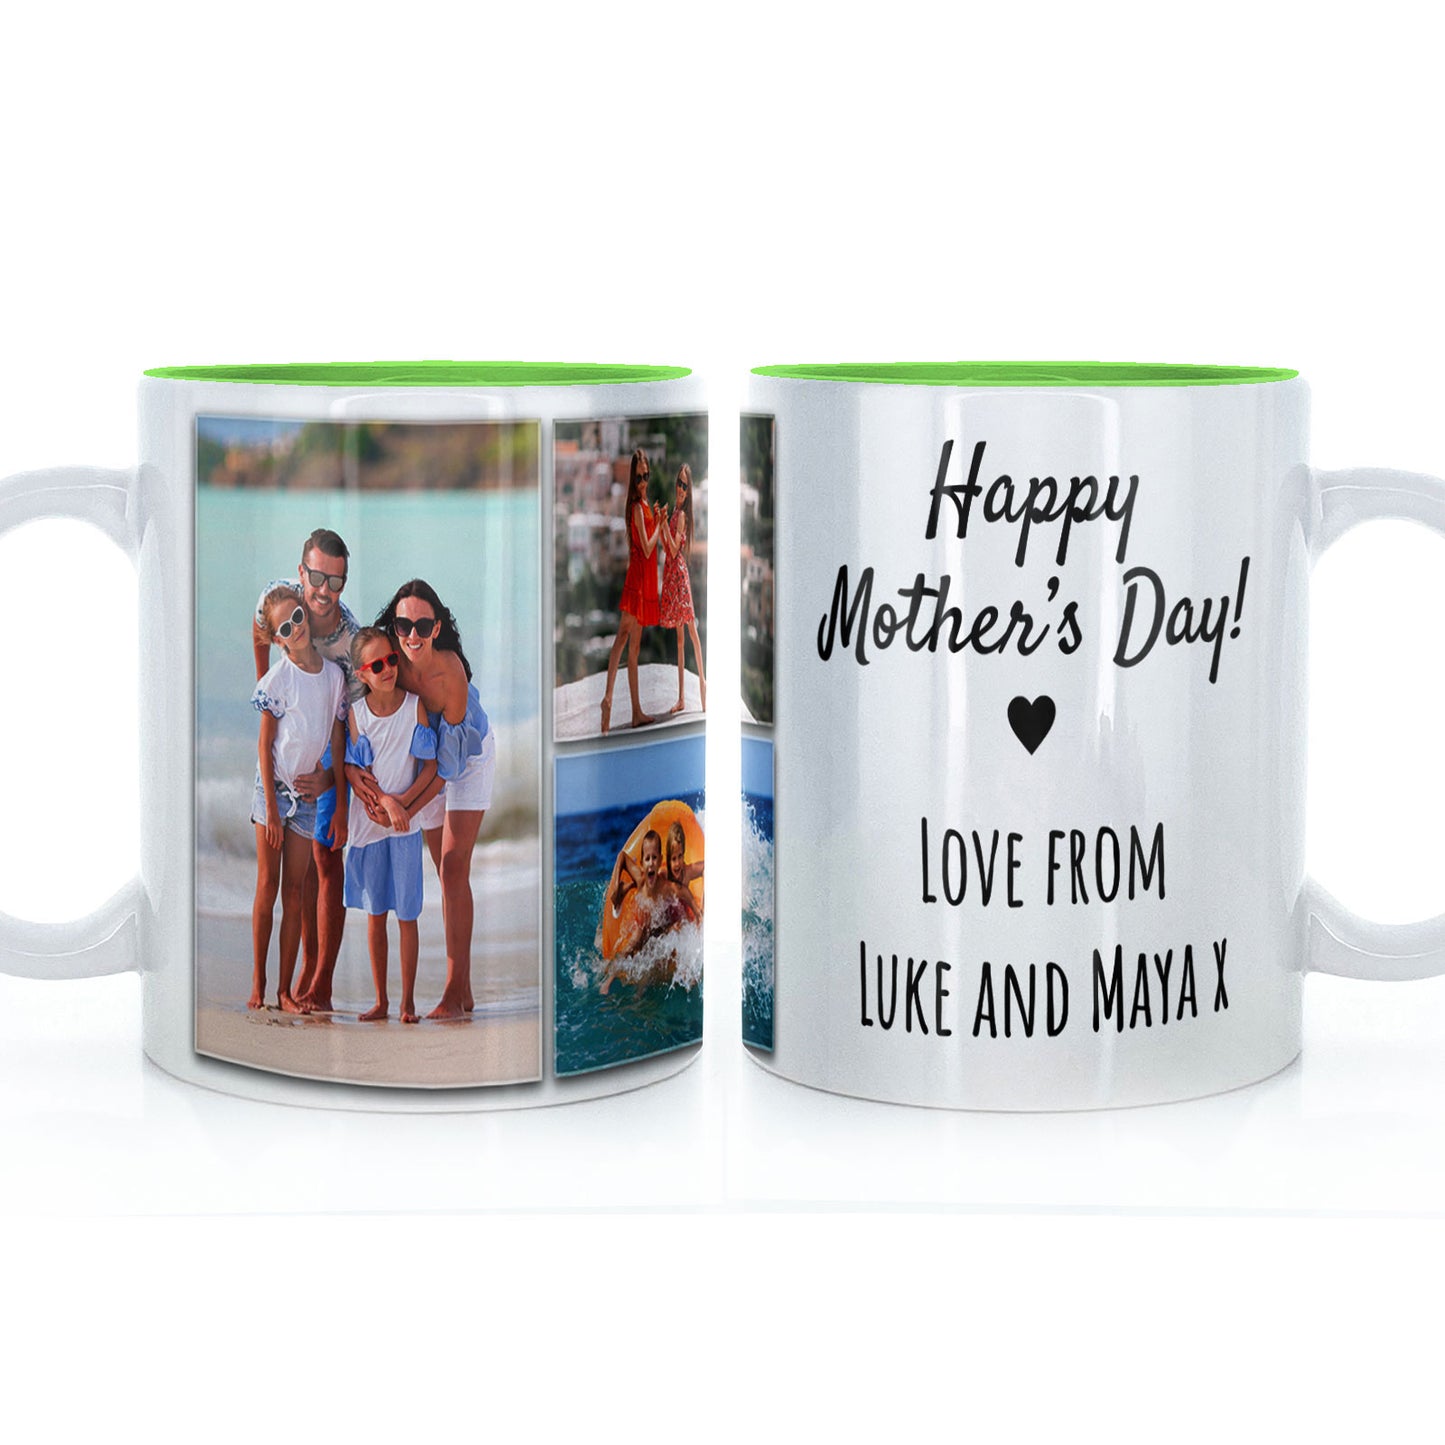 Personalised Mug with Mother’s Day Photo Collage